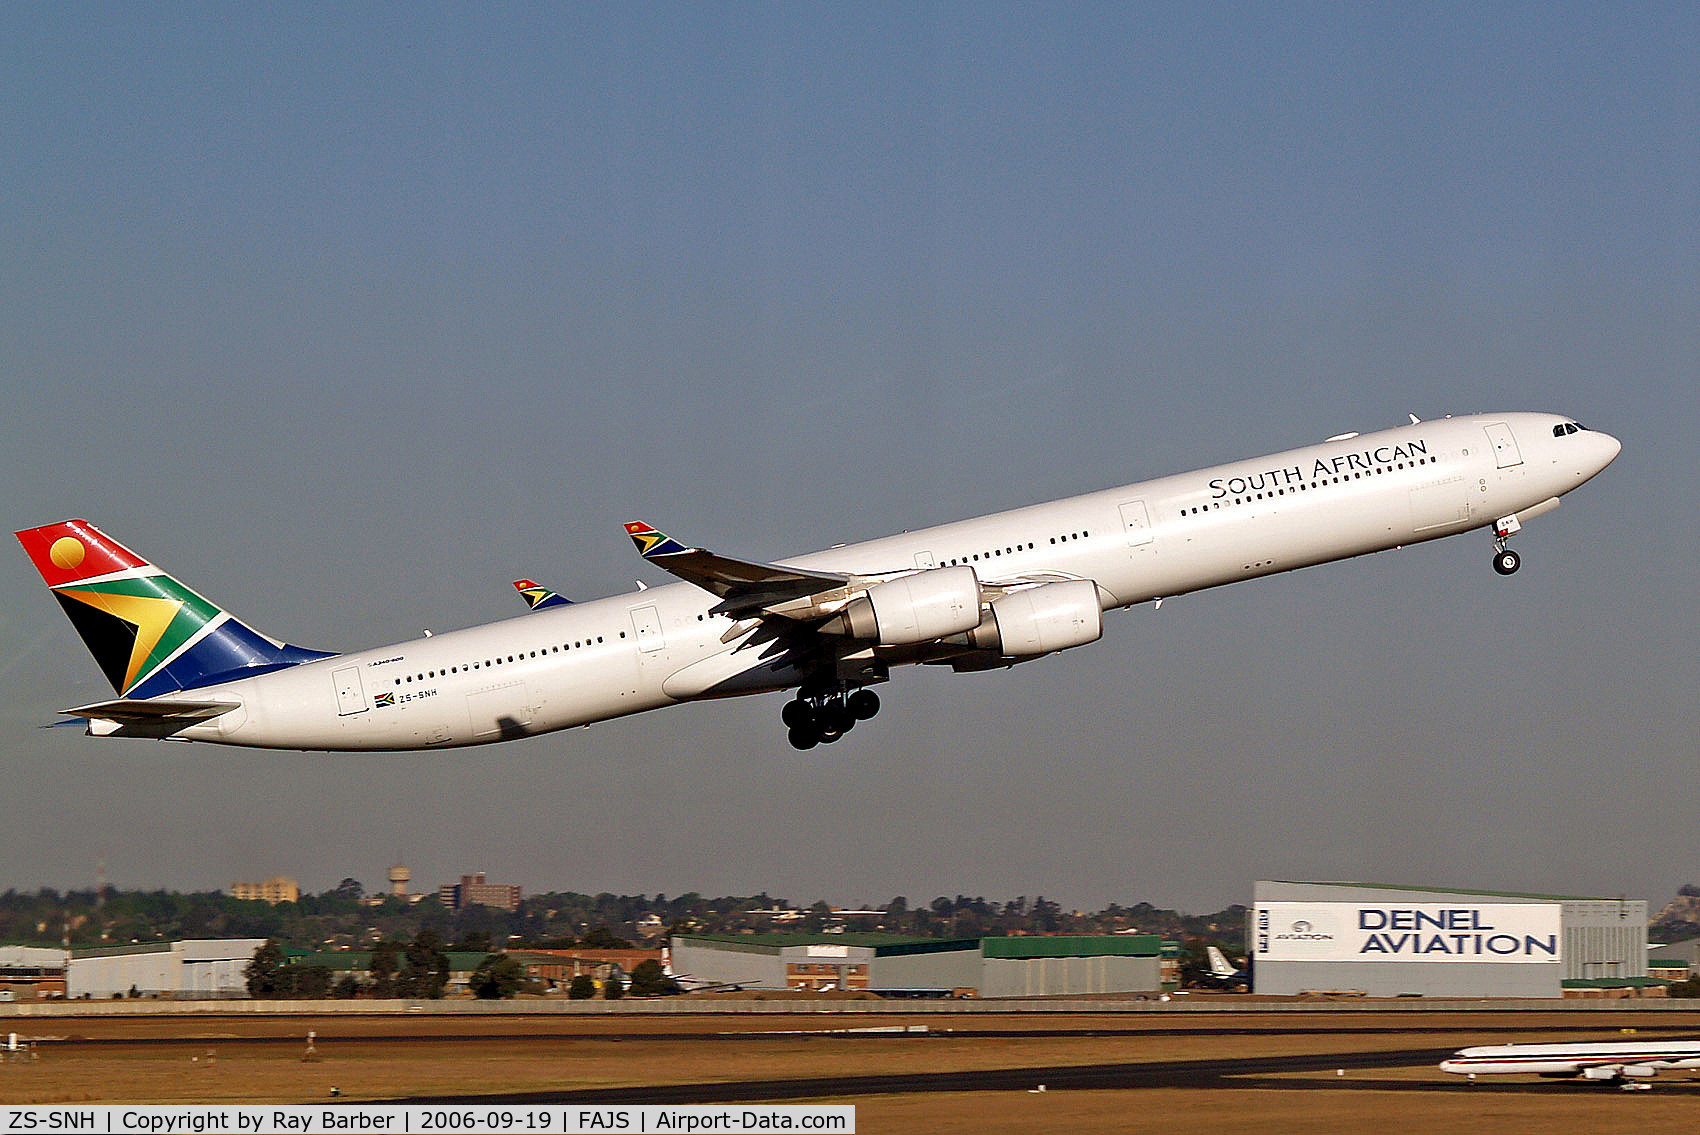 ZS-SNH, 2005 Airbus A340-642 C/N 626, Airbus A340-642 [626] (South African Airways) Johannesburg Int~ZS 19/09/2006